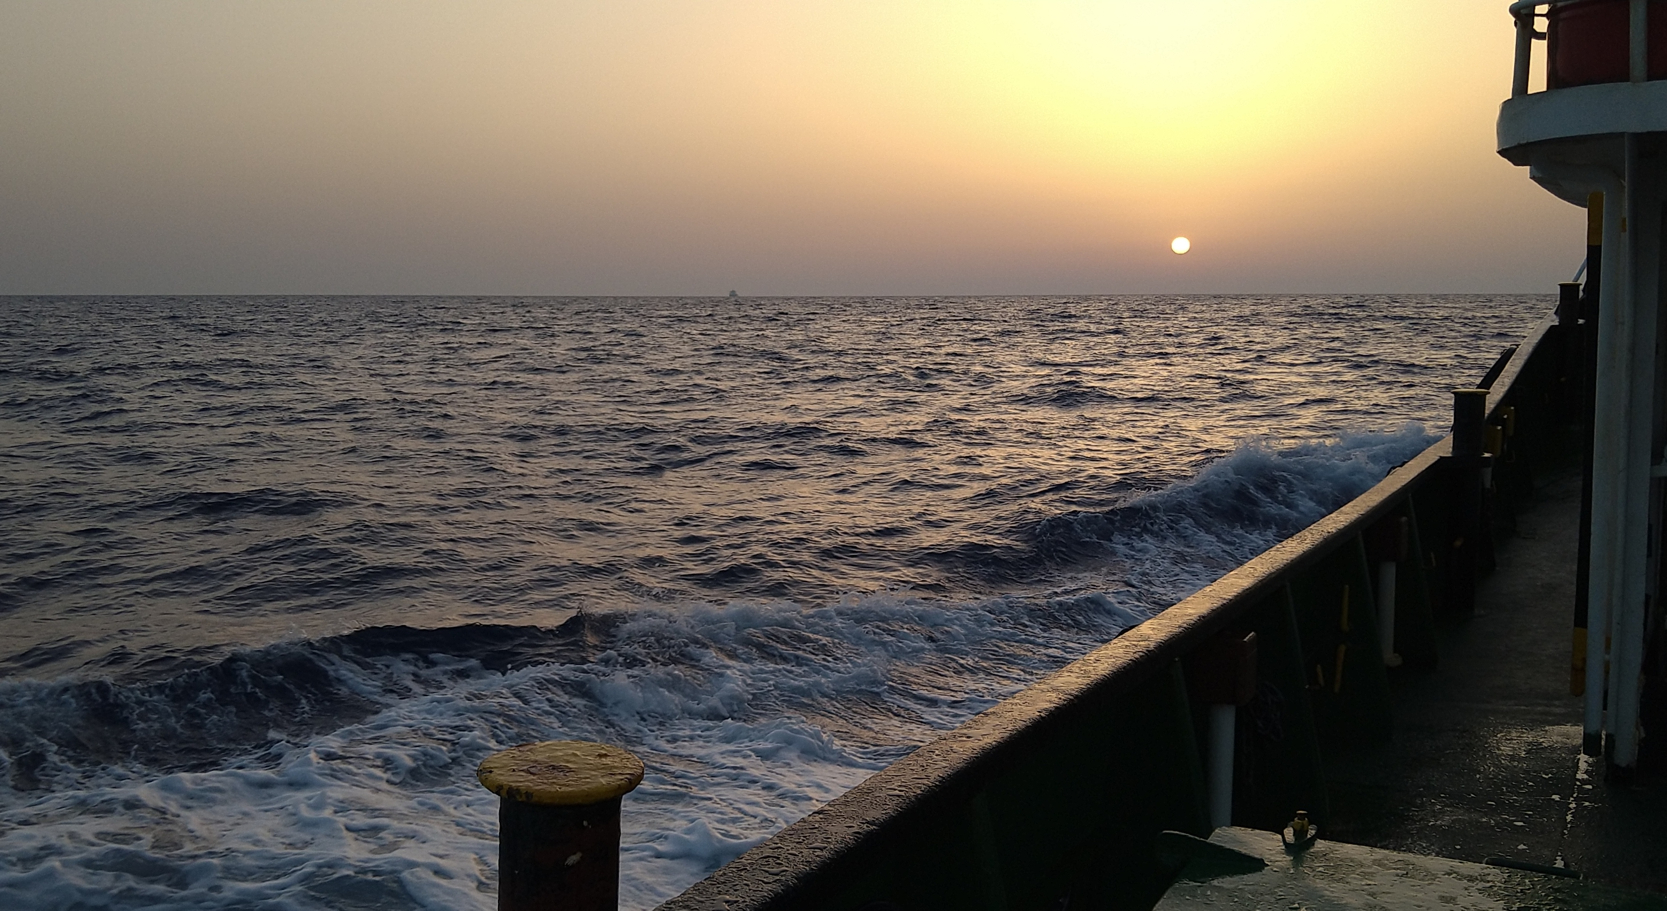 Dusty sunset in the Mediterranean, viewed from aboard Tug Macistone